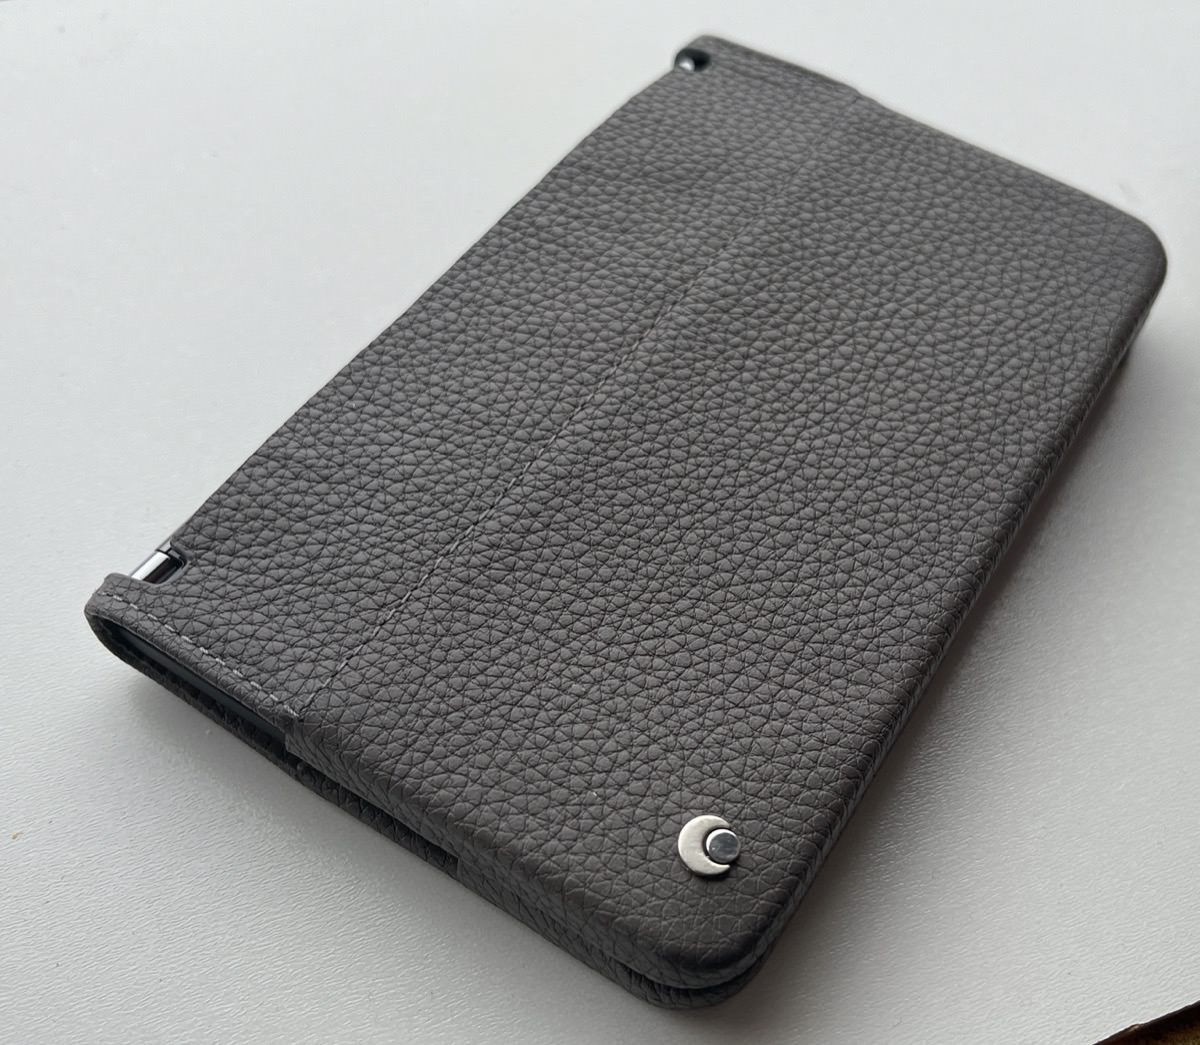 Surface Duo 2 leather cover